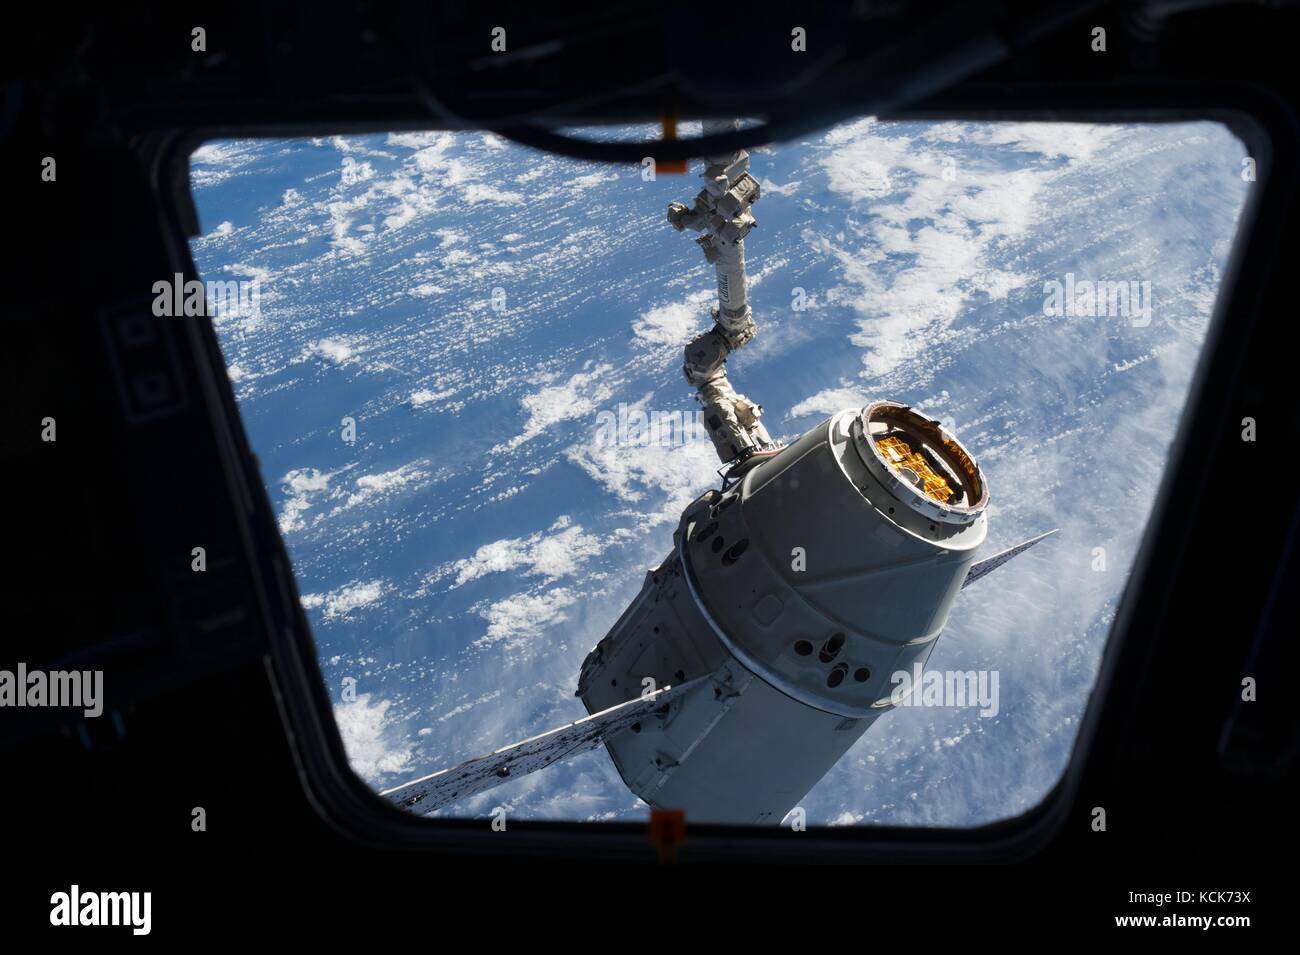 The NASA International Space Station Canadarm2 robotic arm captures the SpaceX Dragon 2 cargo spacecraft during a resupply mission March 3, 2013 in Earth orbit.  (photo by NASA Photo  via Planetpix) Stock Photo